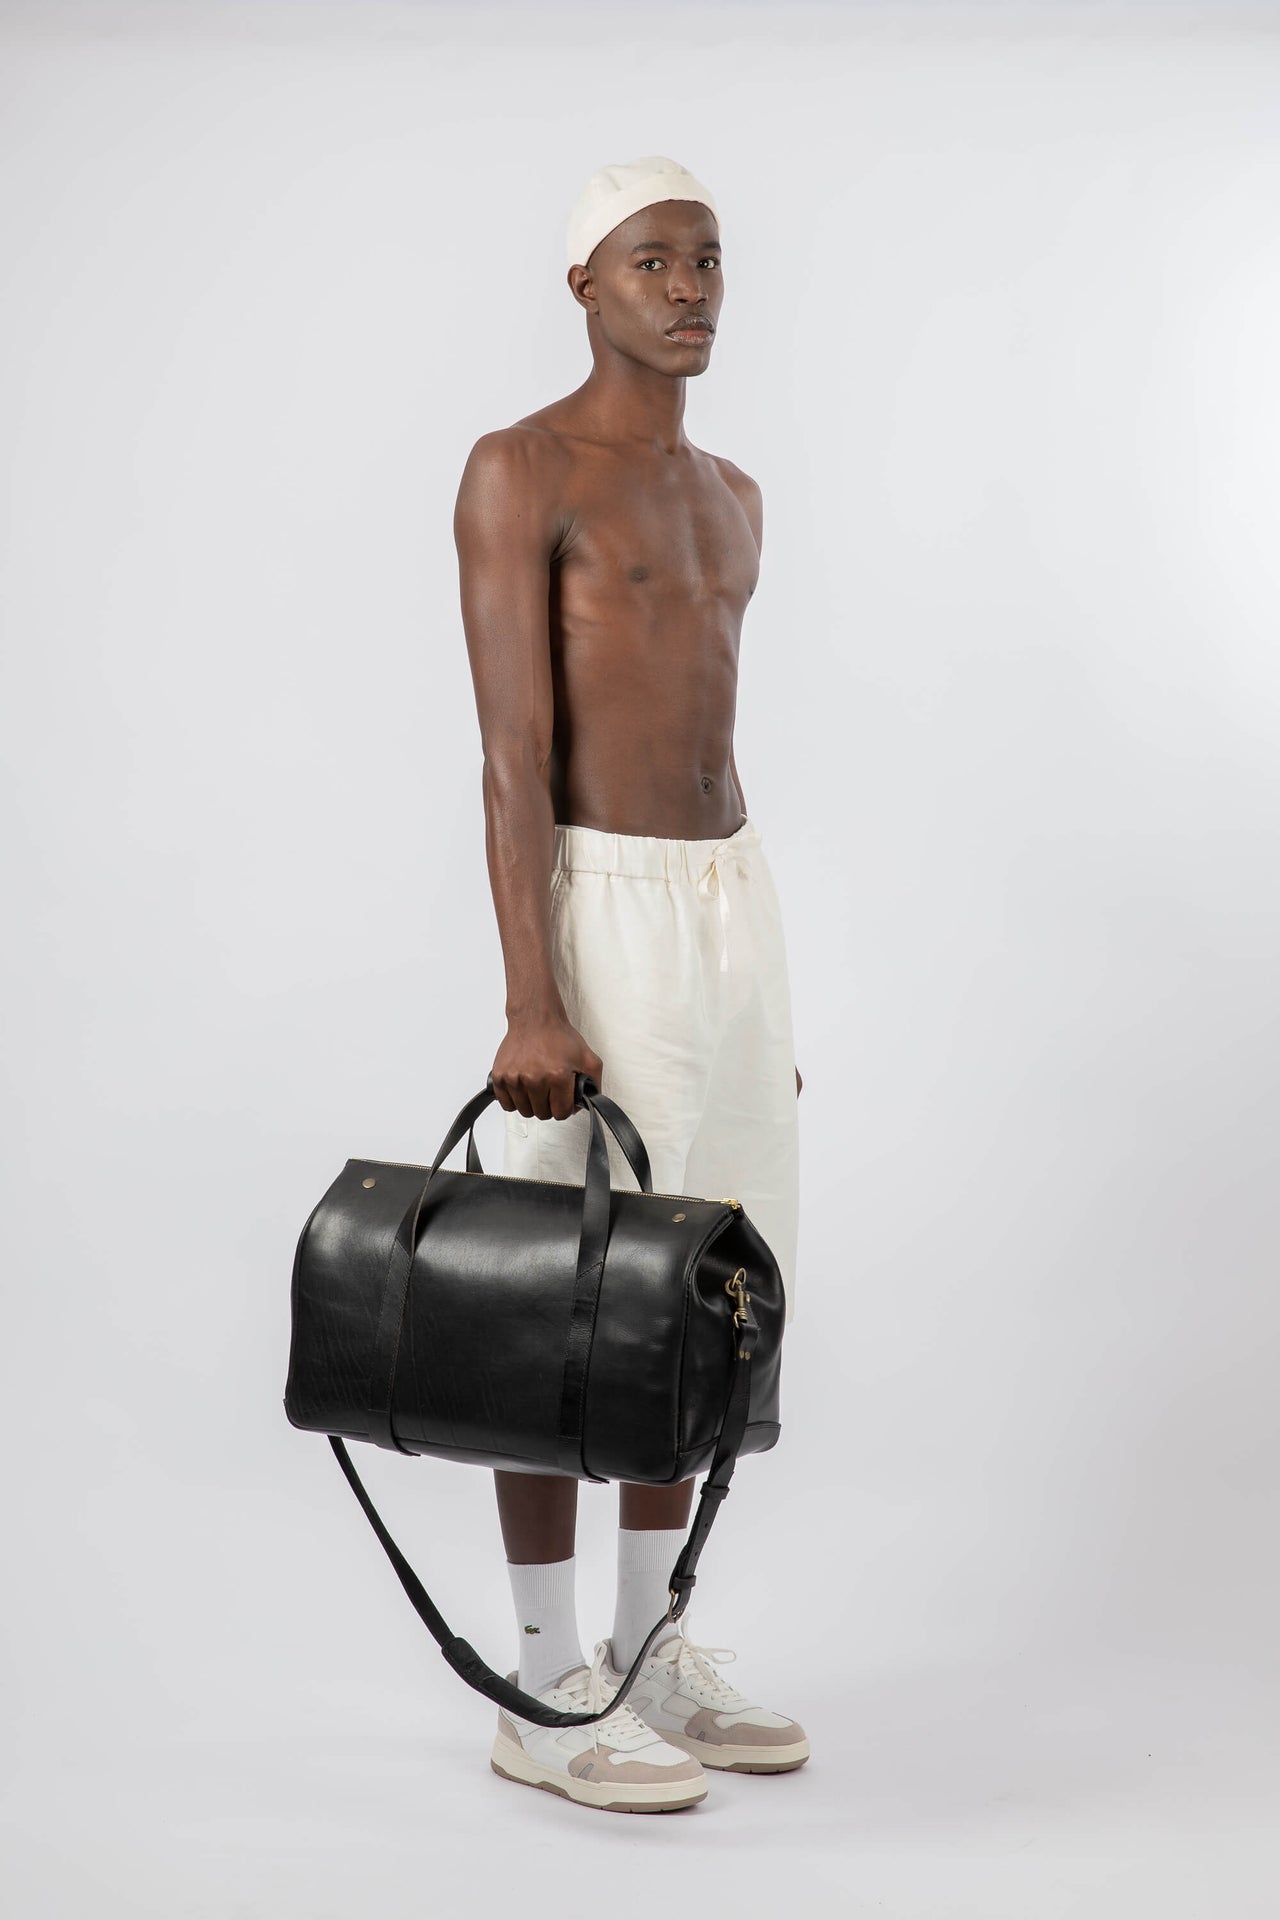 Leather Army Duffle Bag — High On Leather